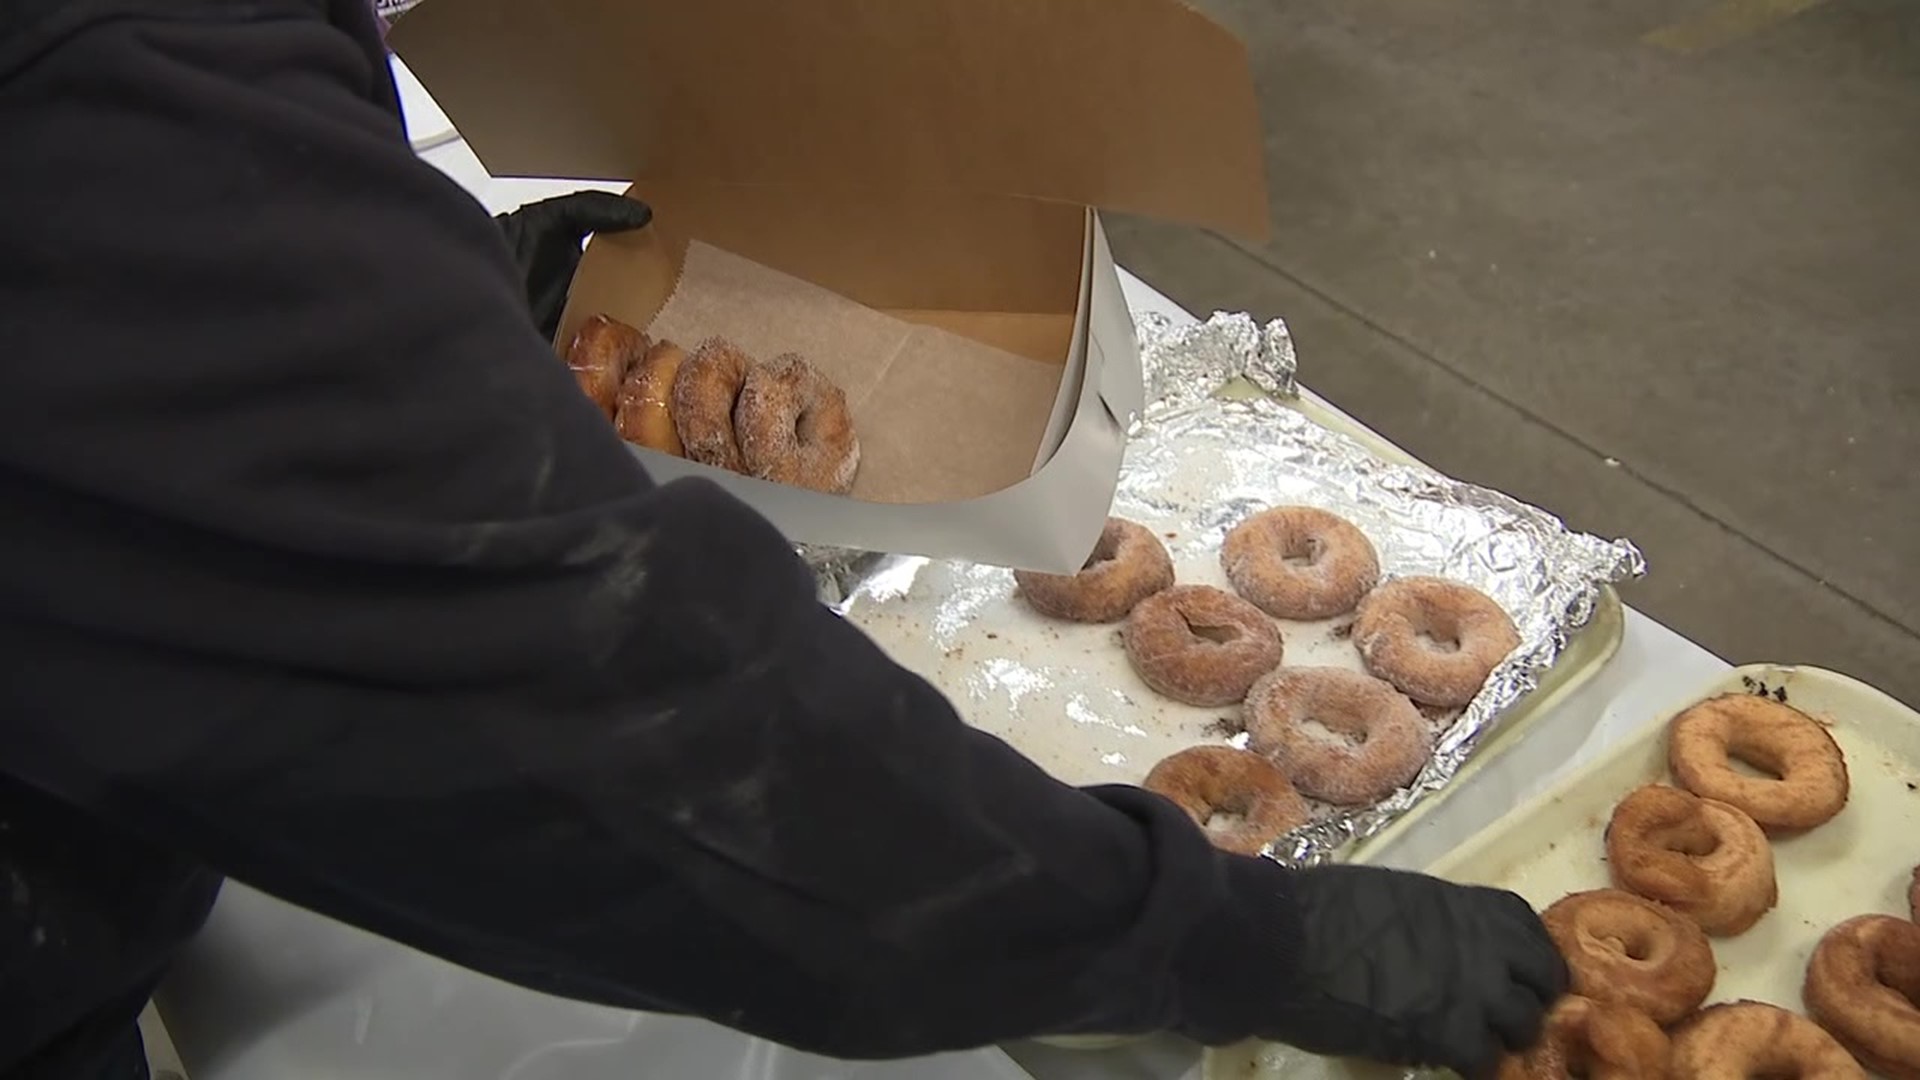 It's time to make the doughnuts at a fire company in Northumberland County where they cooked up thousands of delicious treats to satisfy any sweet tooth.